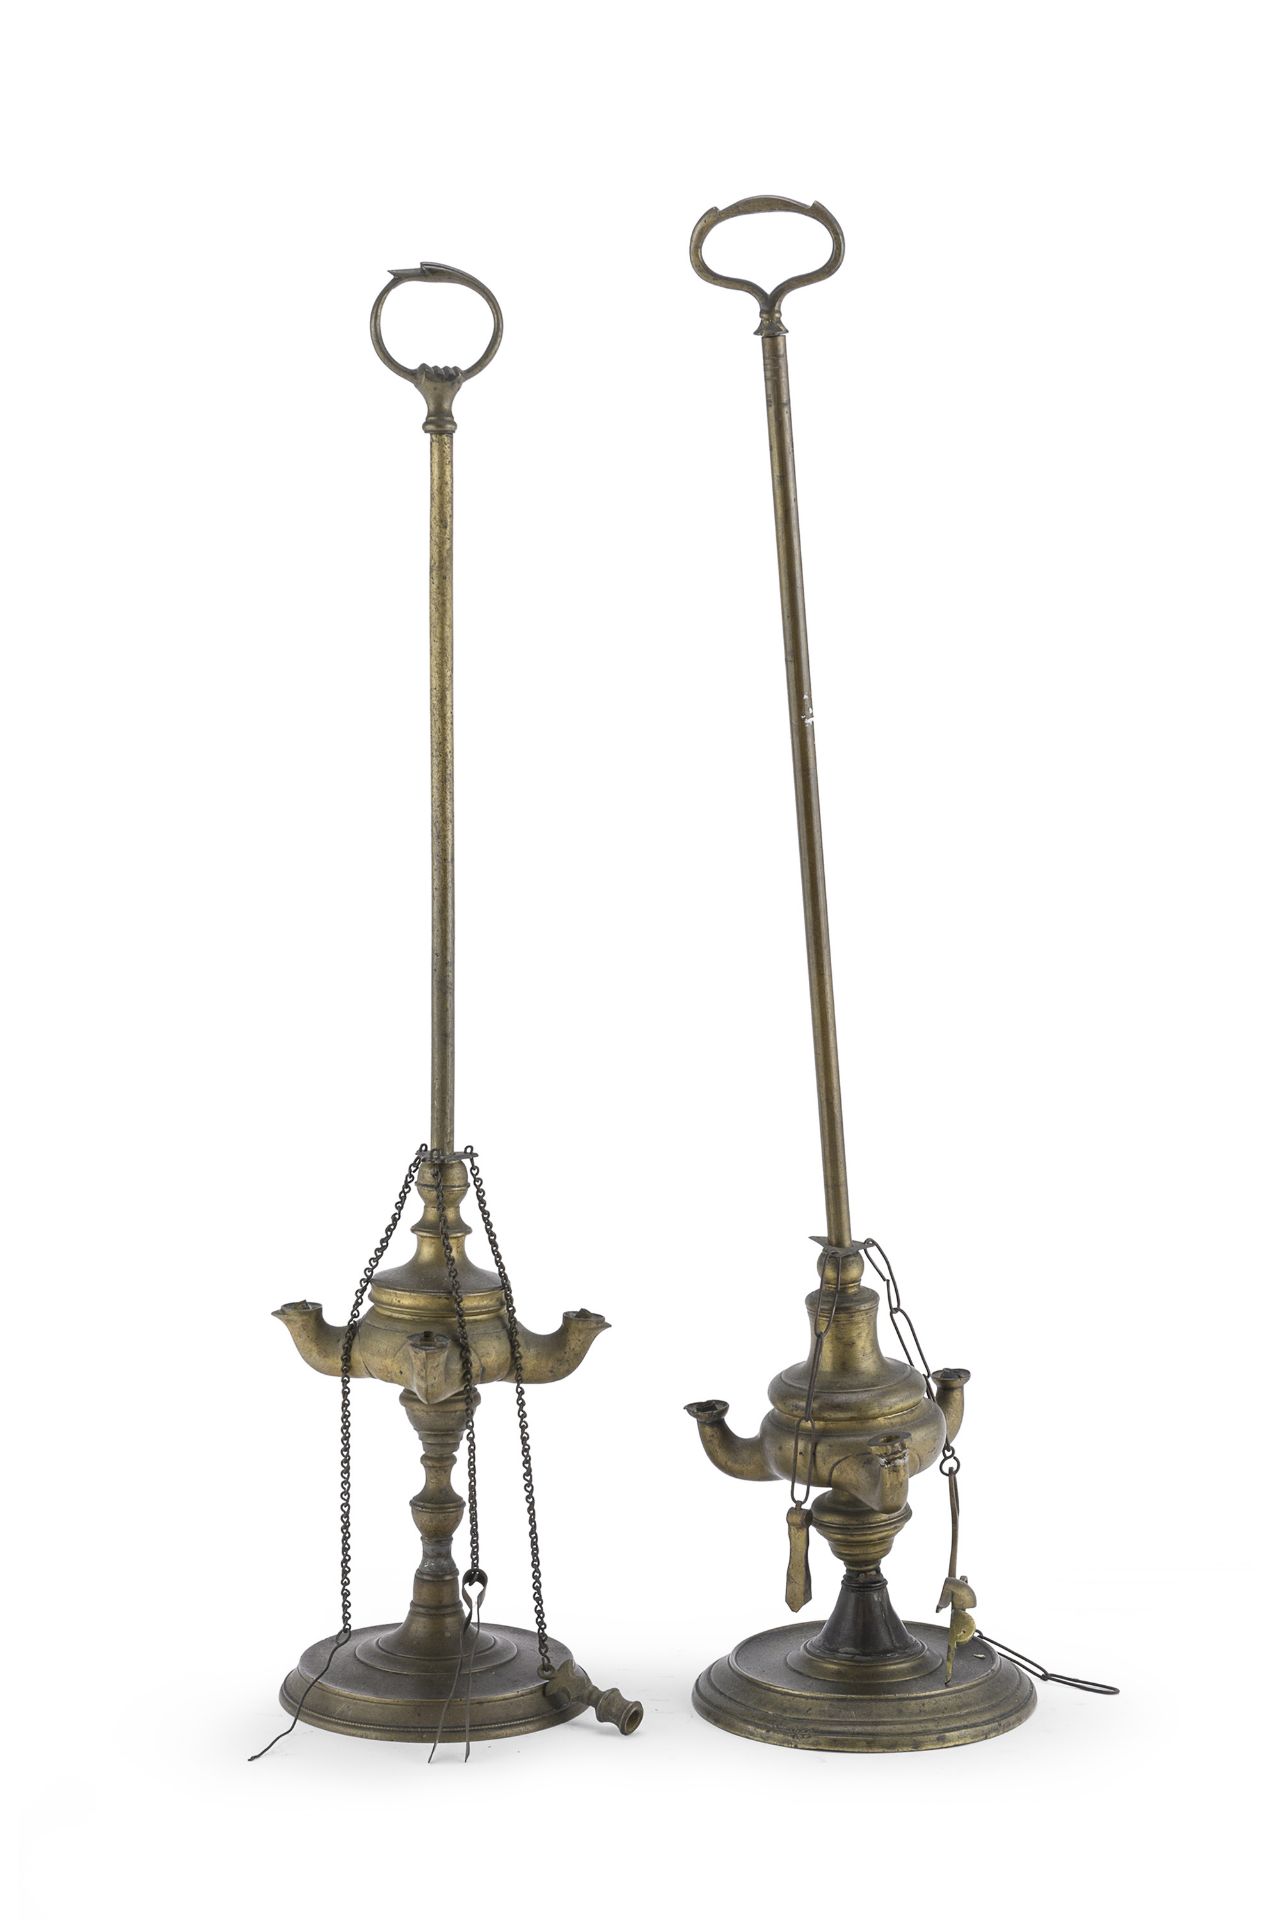 TWO GILT METAL FLORENTINE OIL LAMPS 19TH CENTURY